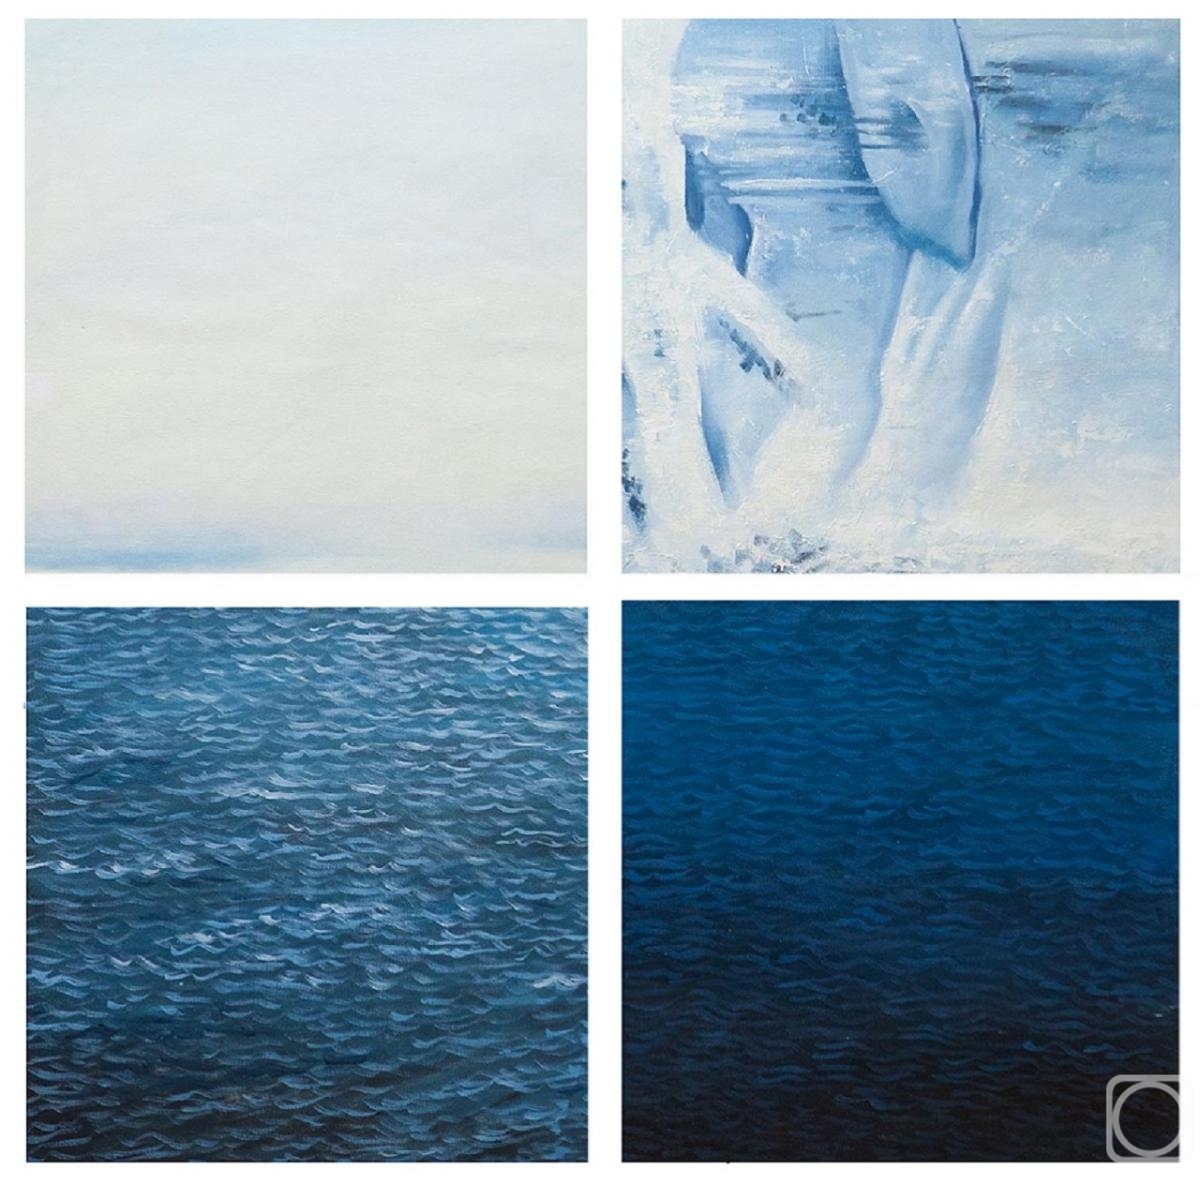 Gomes Liya. Ice, air and water. Quadriptych